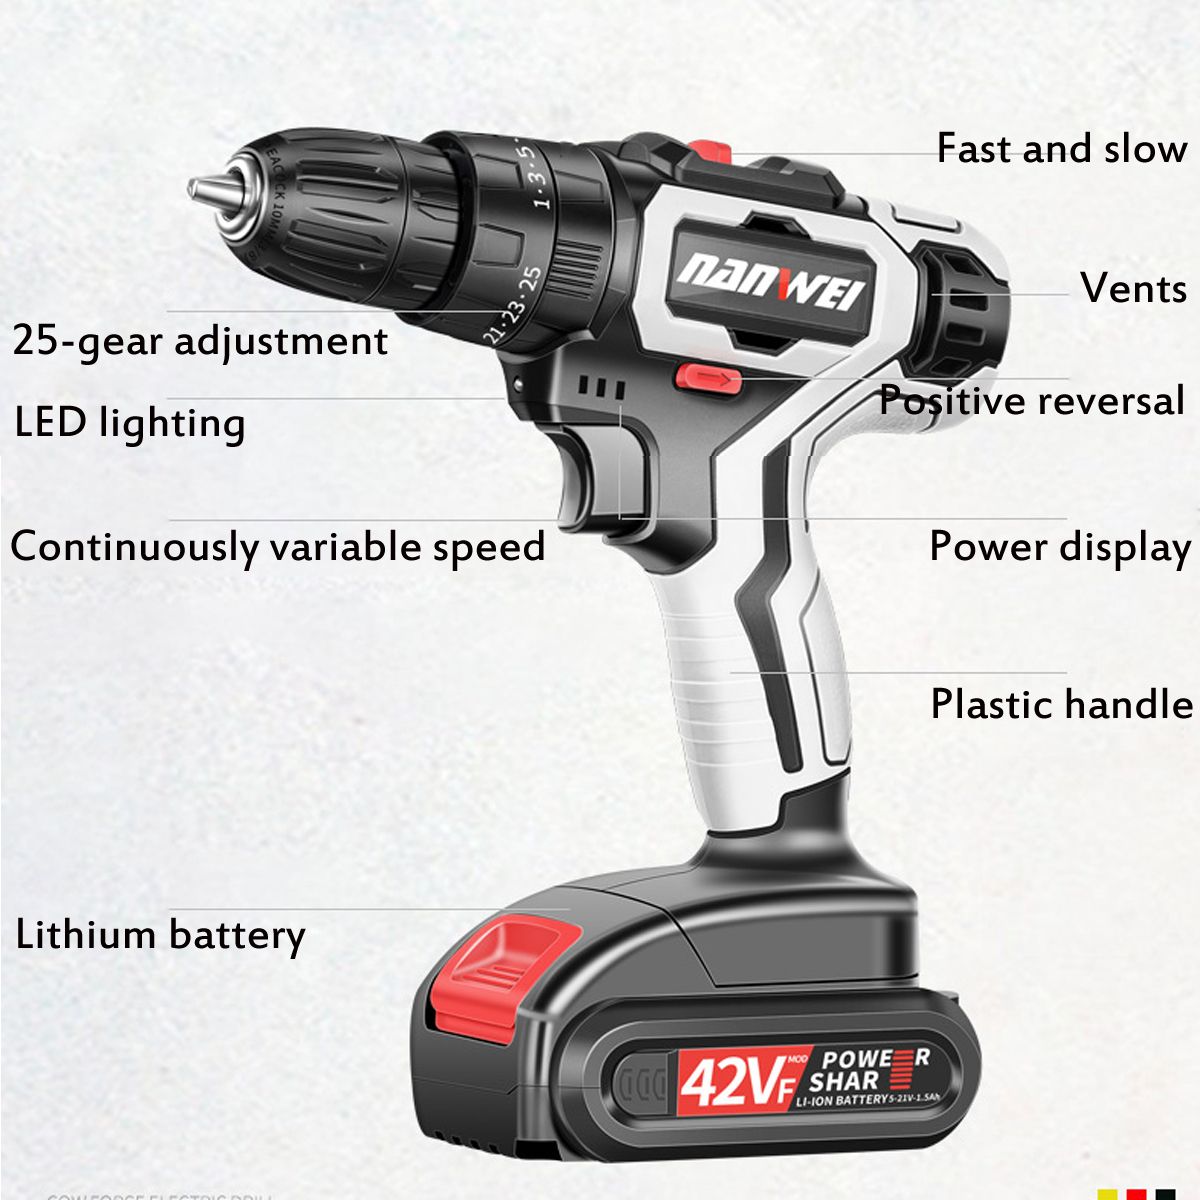 42VF-51500mah-Electric-Drill-Driver-2-Speed-36NM-Power-Drills-W-1-or-2-Battery-253-Torque-DIY-Powerf-1586341